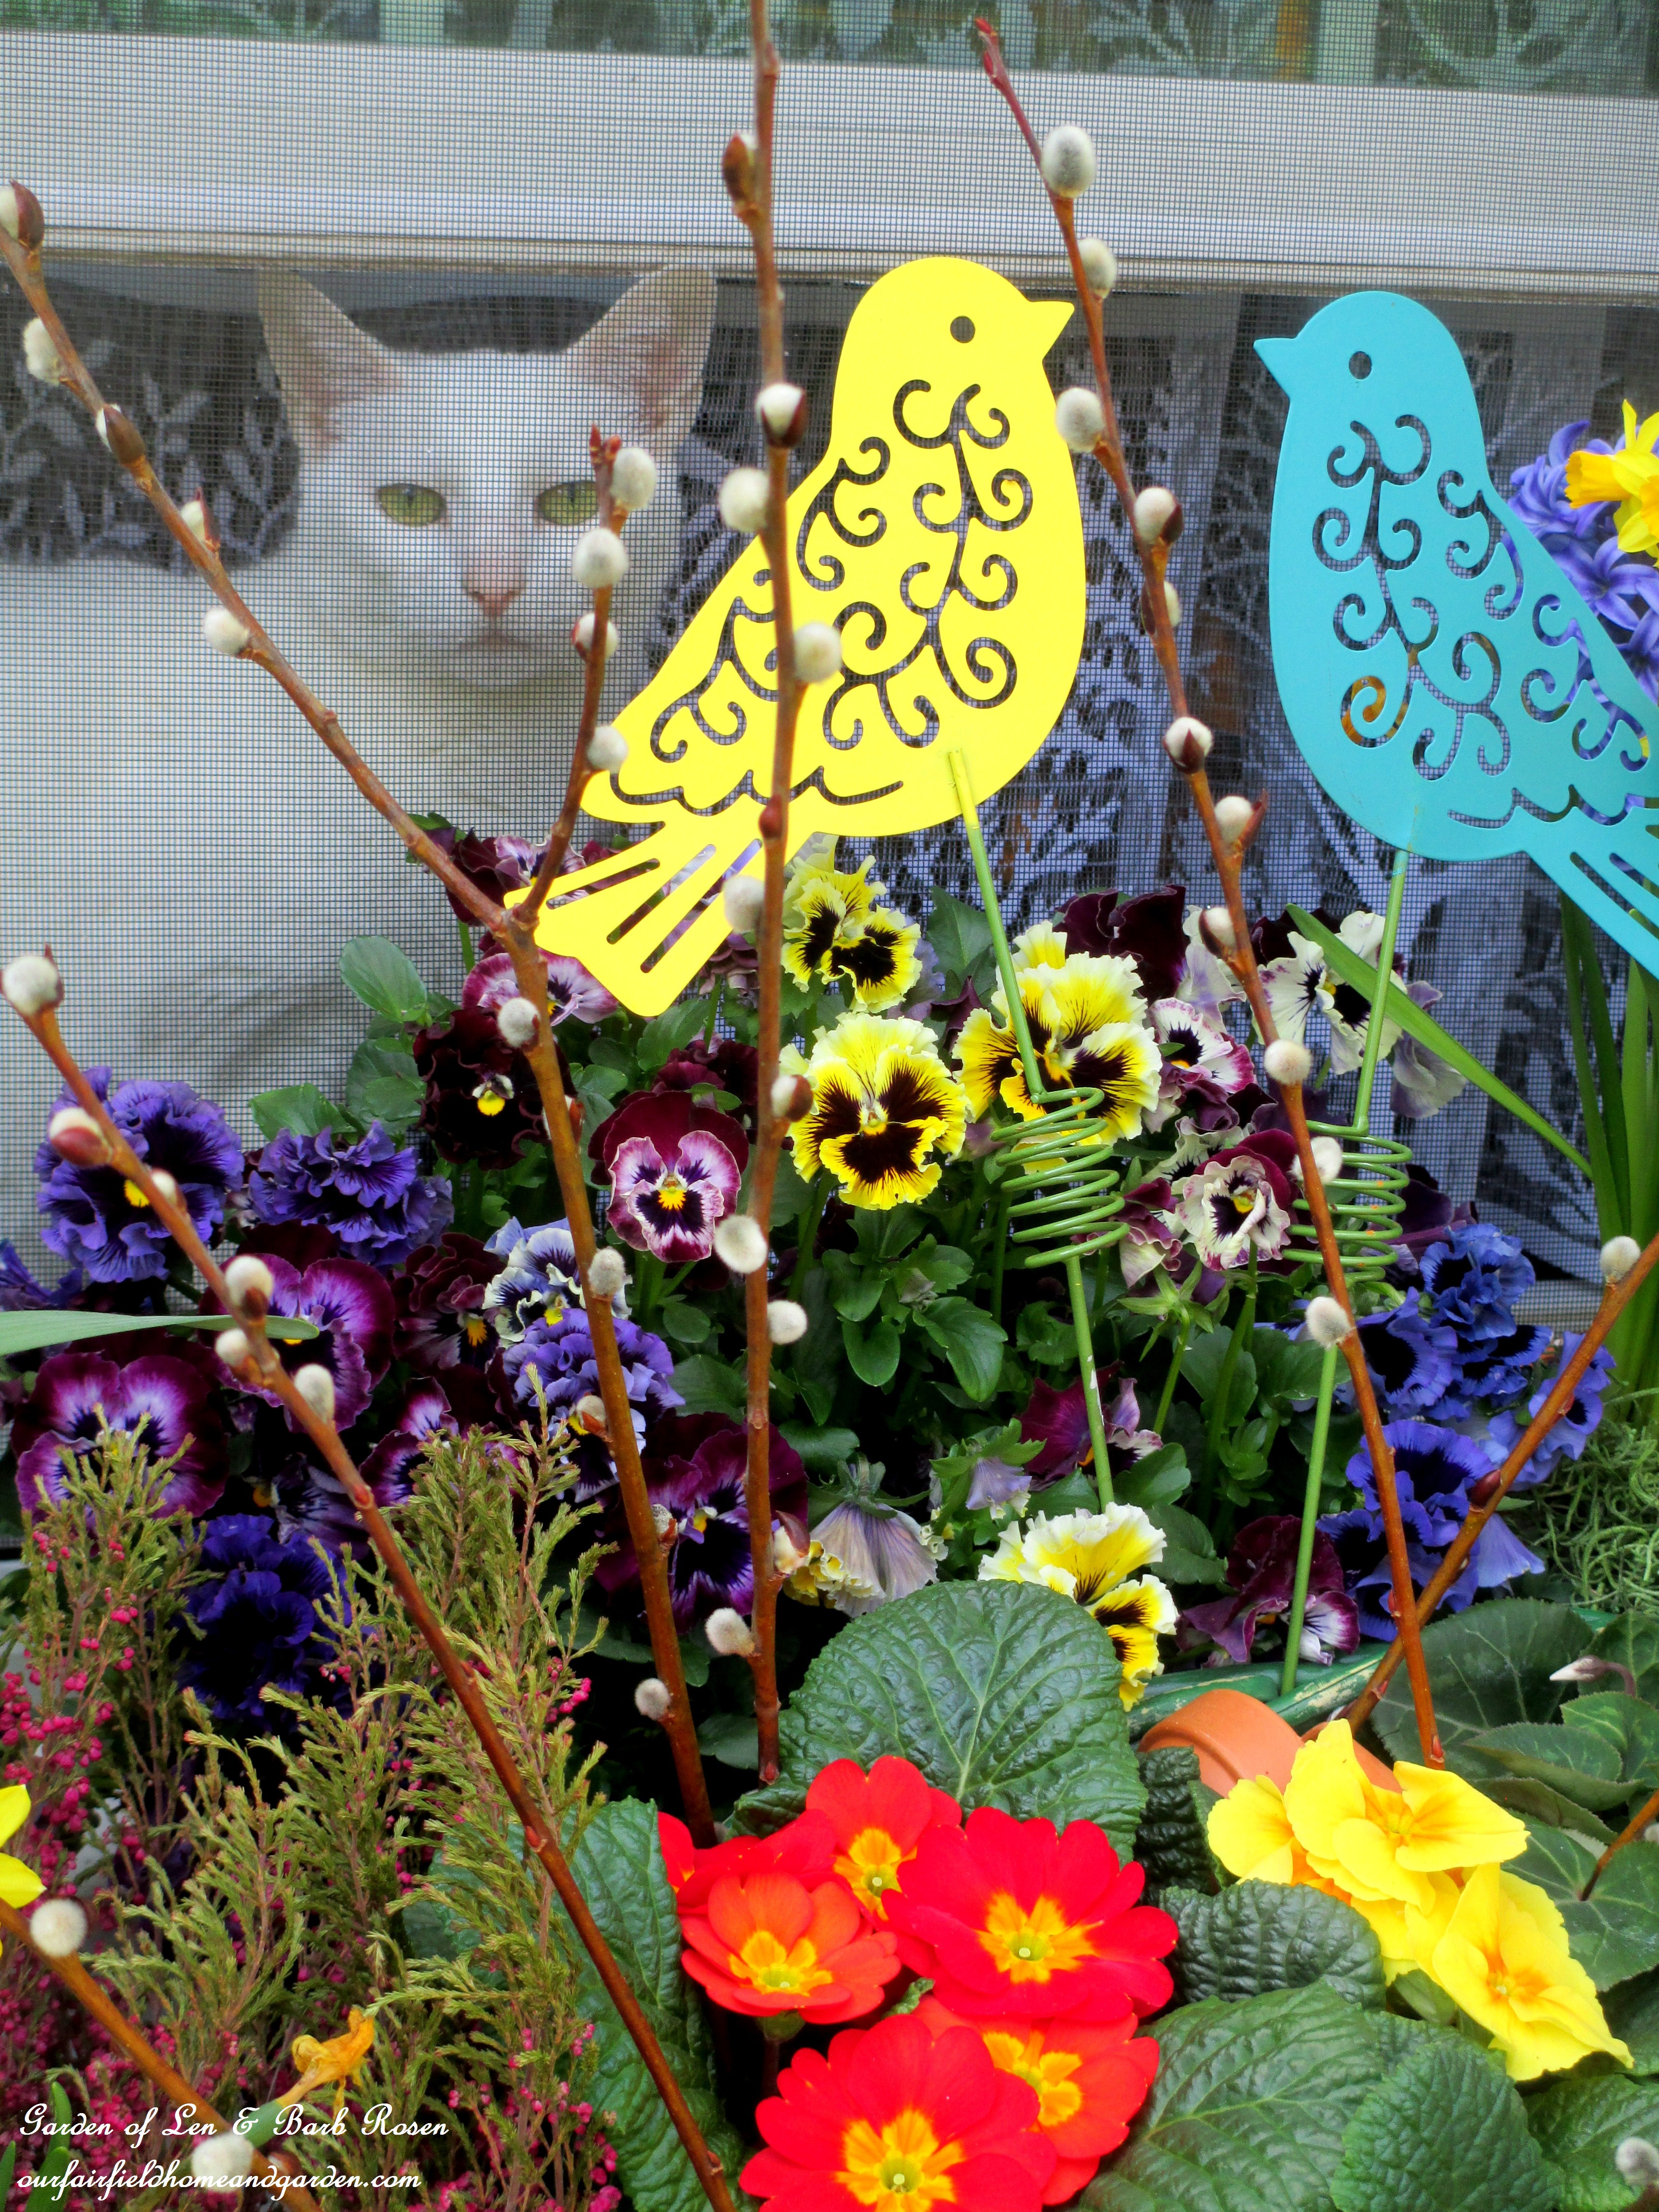 cat in window https://ourfairfieldhomeandgarden.com/signs-of-spring-at-our-fairfield-home-garden/